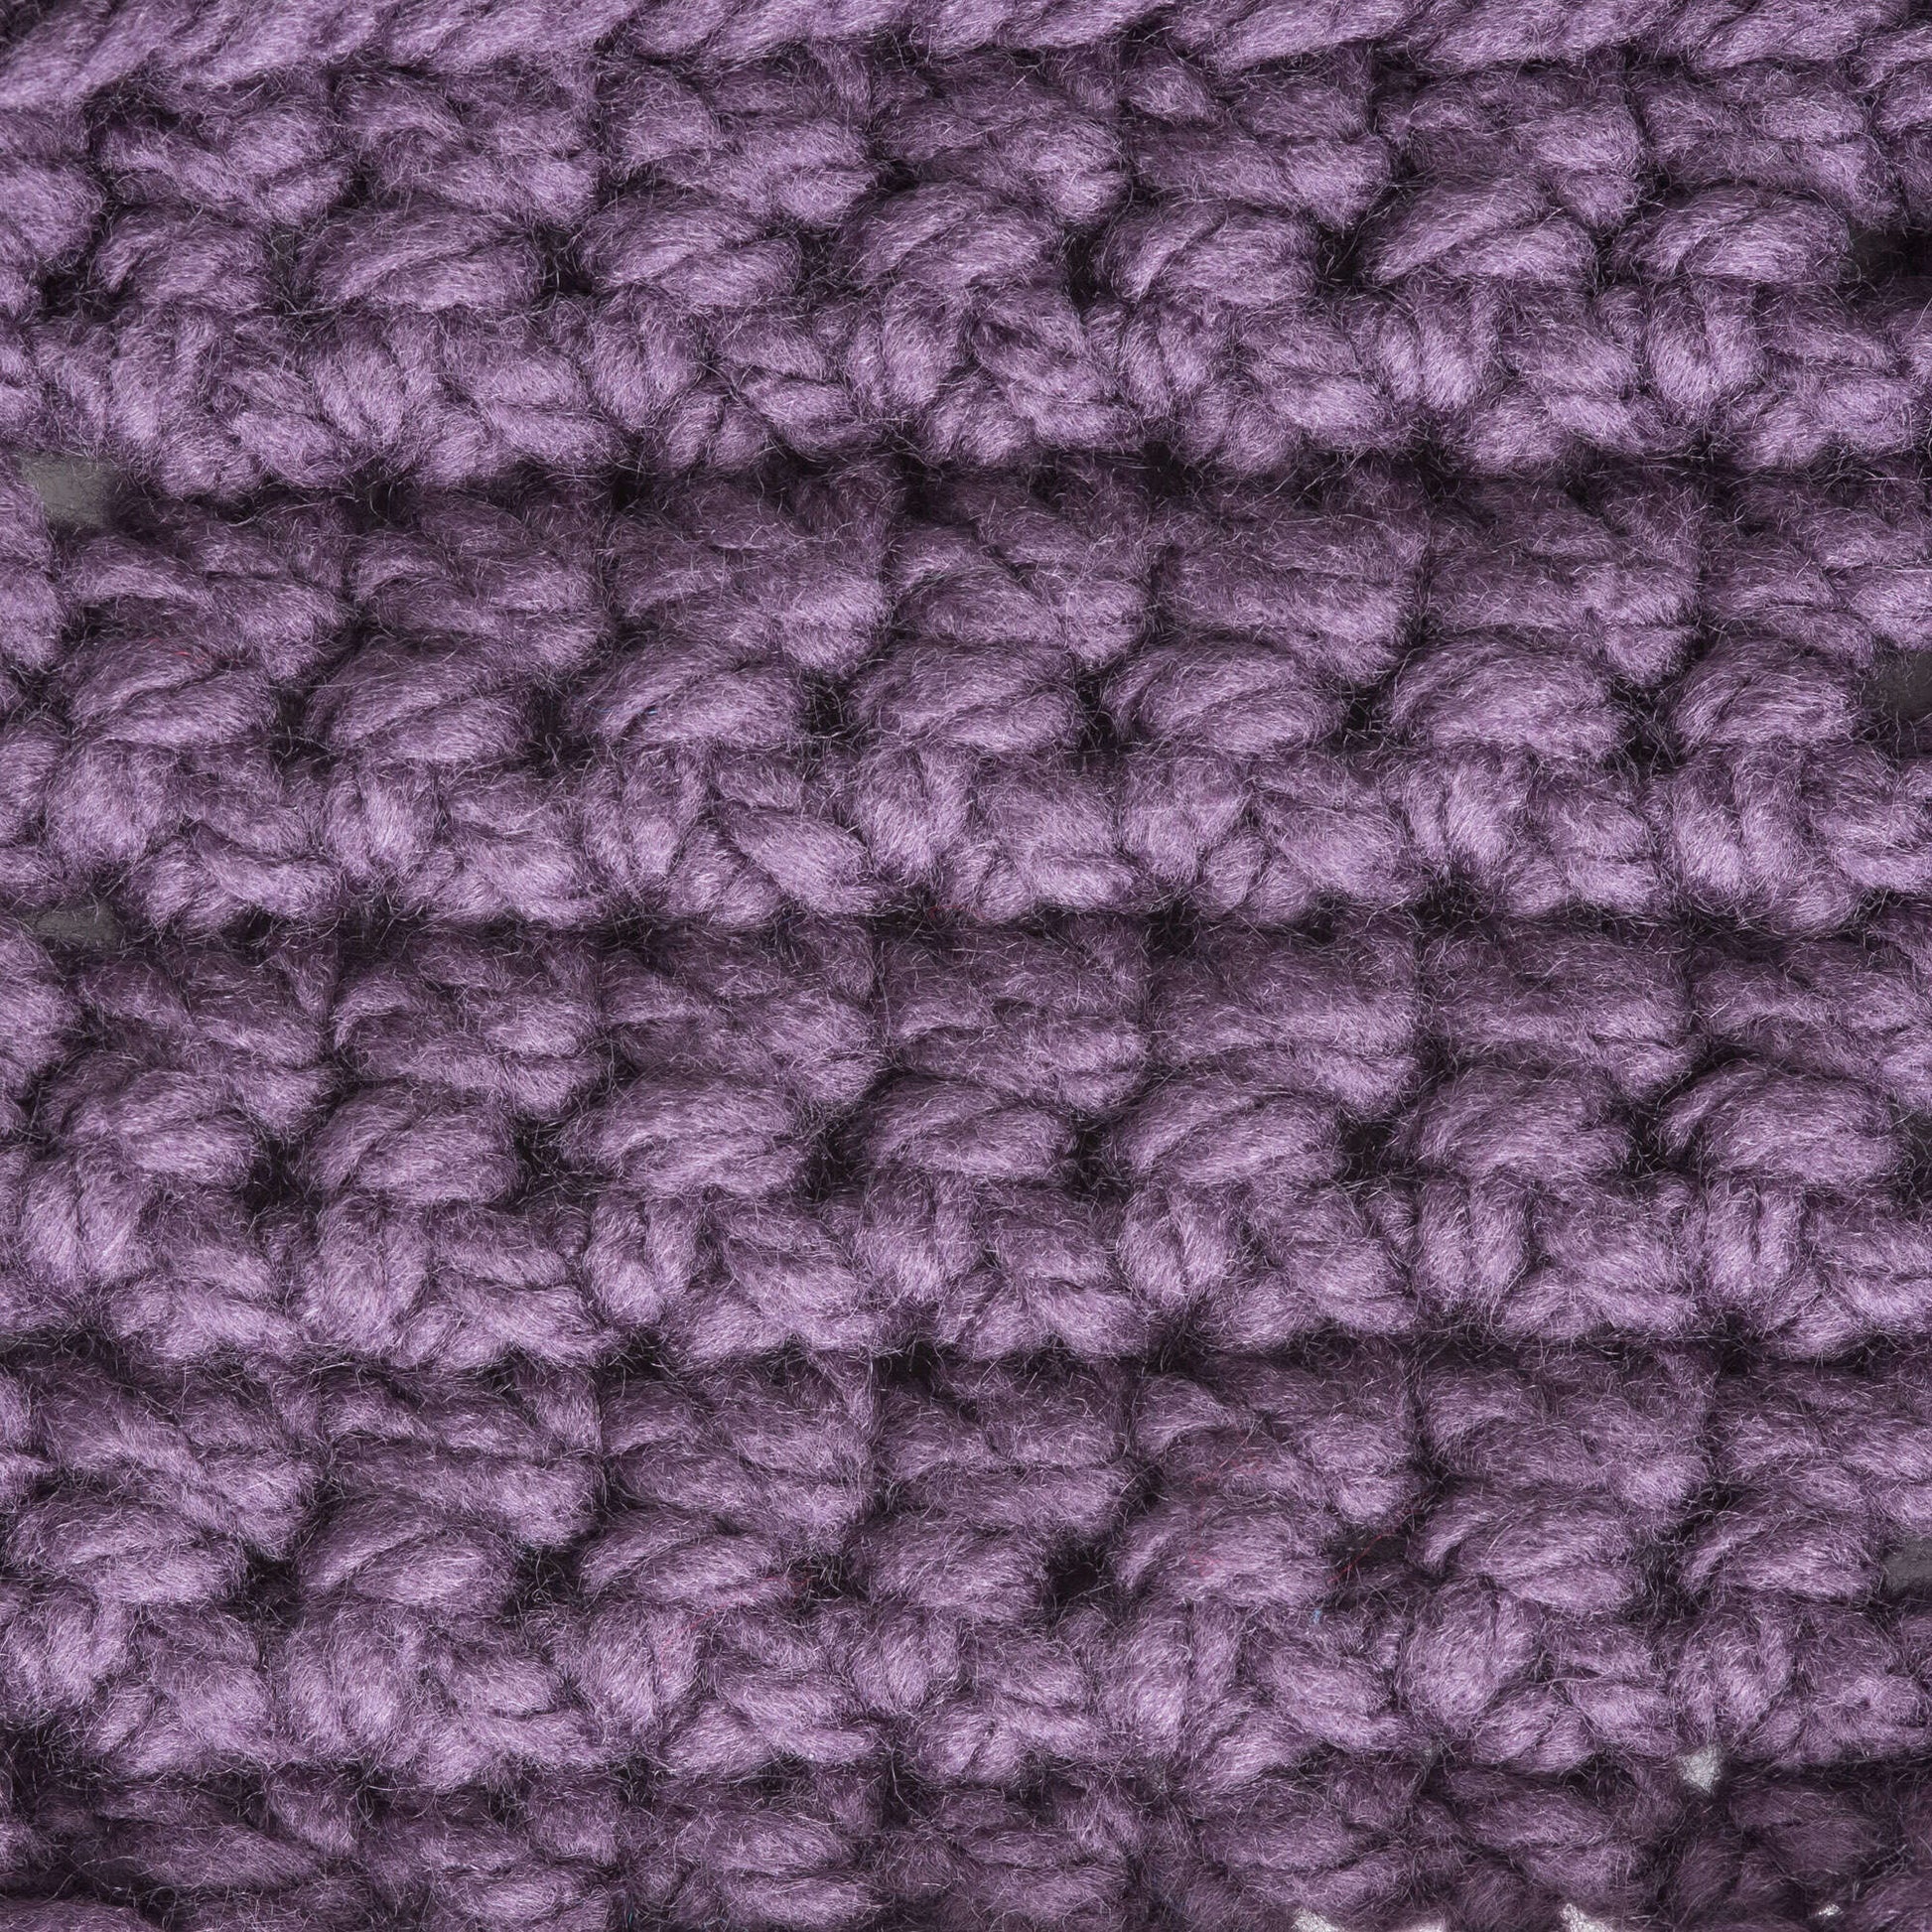 I made a scarf for myself for the first time! I used Bernat Softee Chunky  Yarn, 3.5 Oz, Gauge 6 Super Bulky, in colors Lavender, Baby Pink, and  Emerald. The whole thing